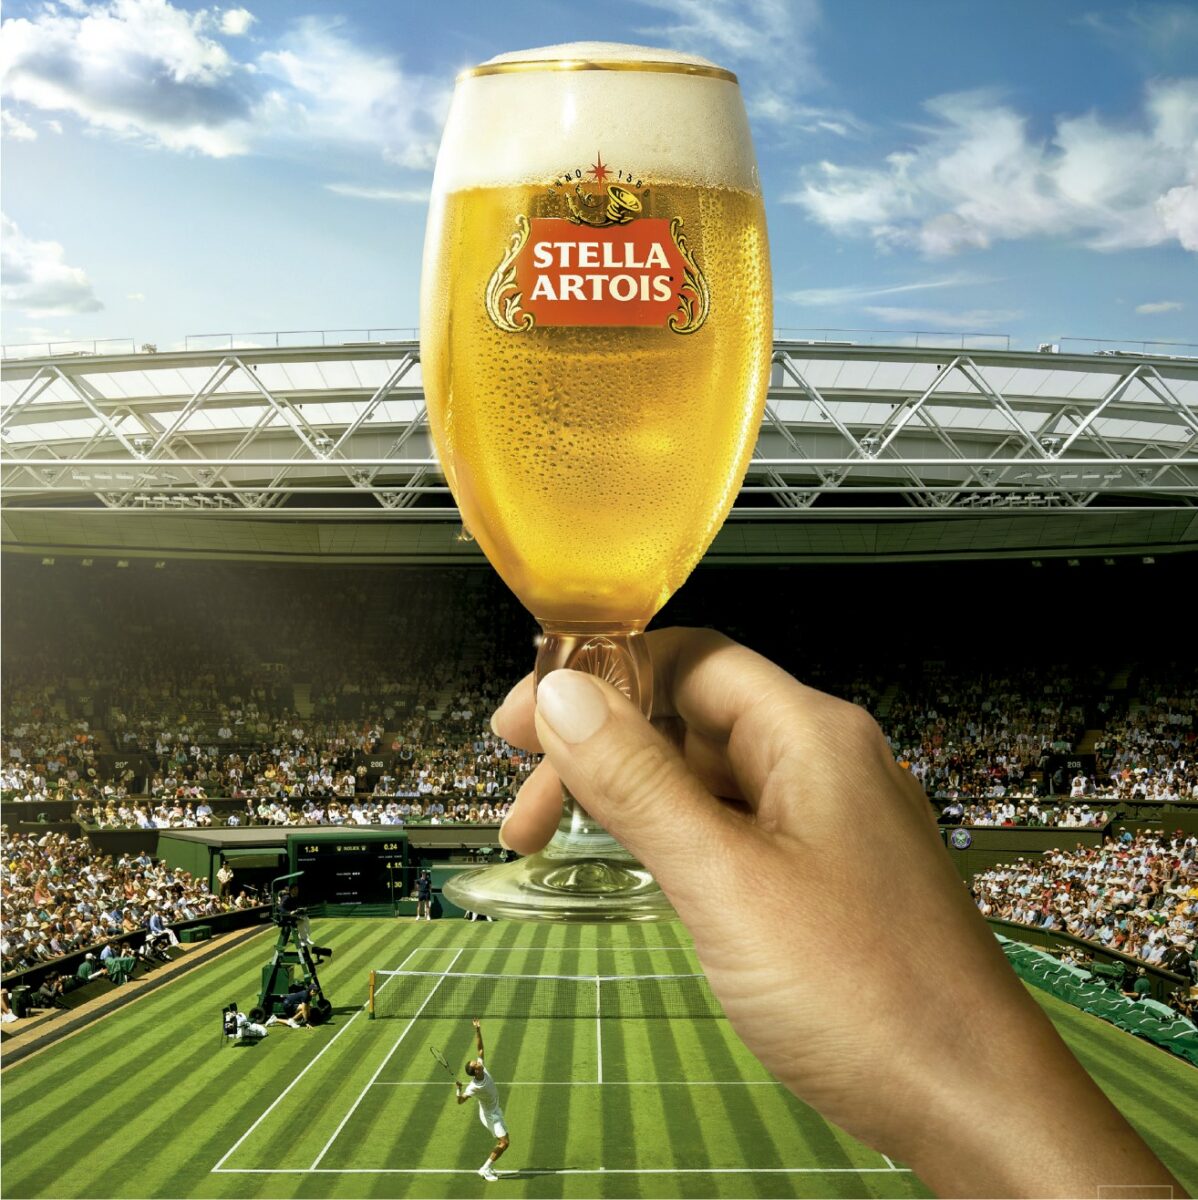 Depicting a glass of Stella Artois beer - named the official beer partner for this year's upcoming Wimbledon competition.